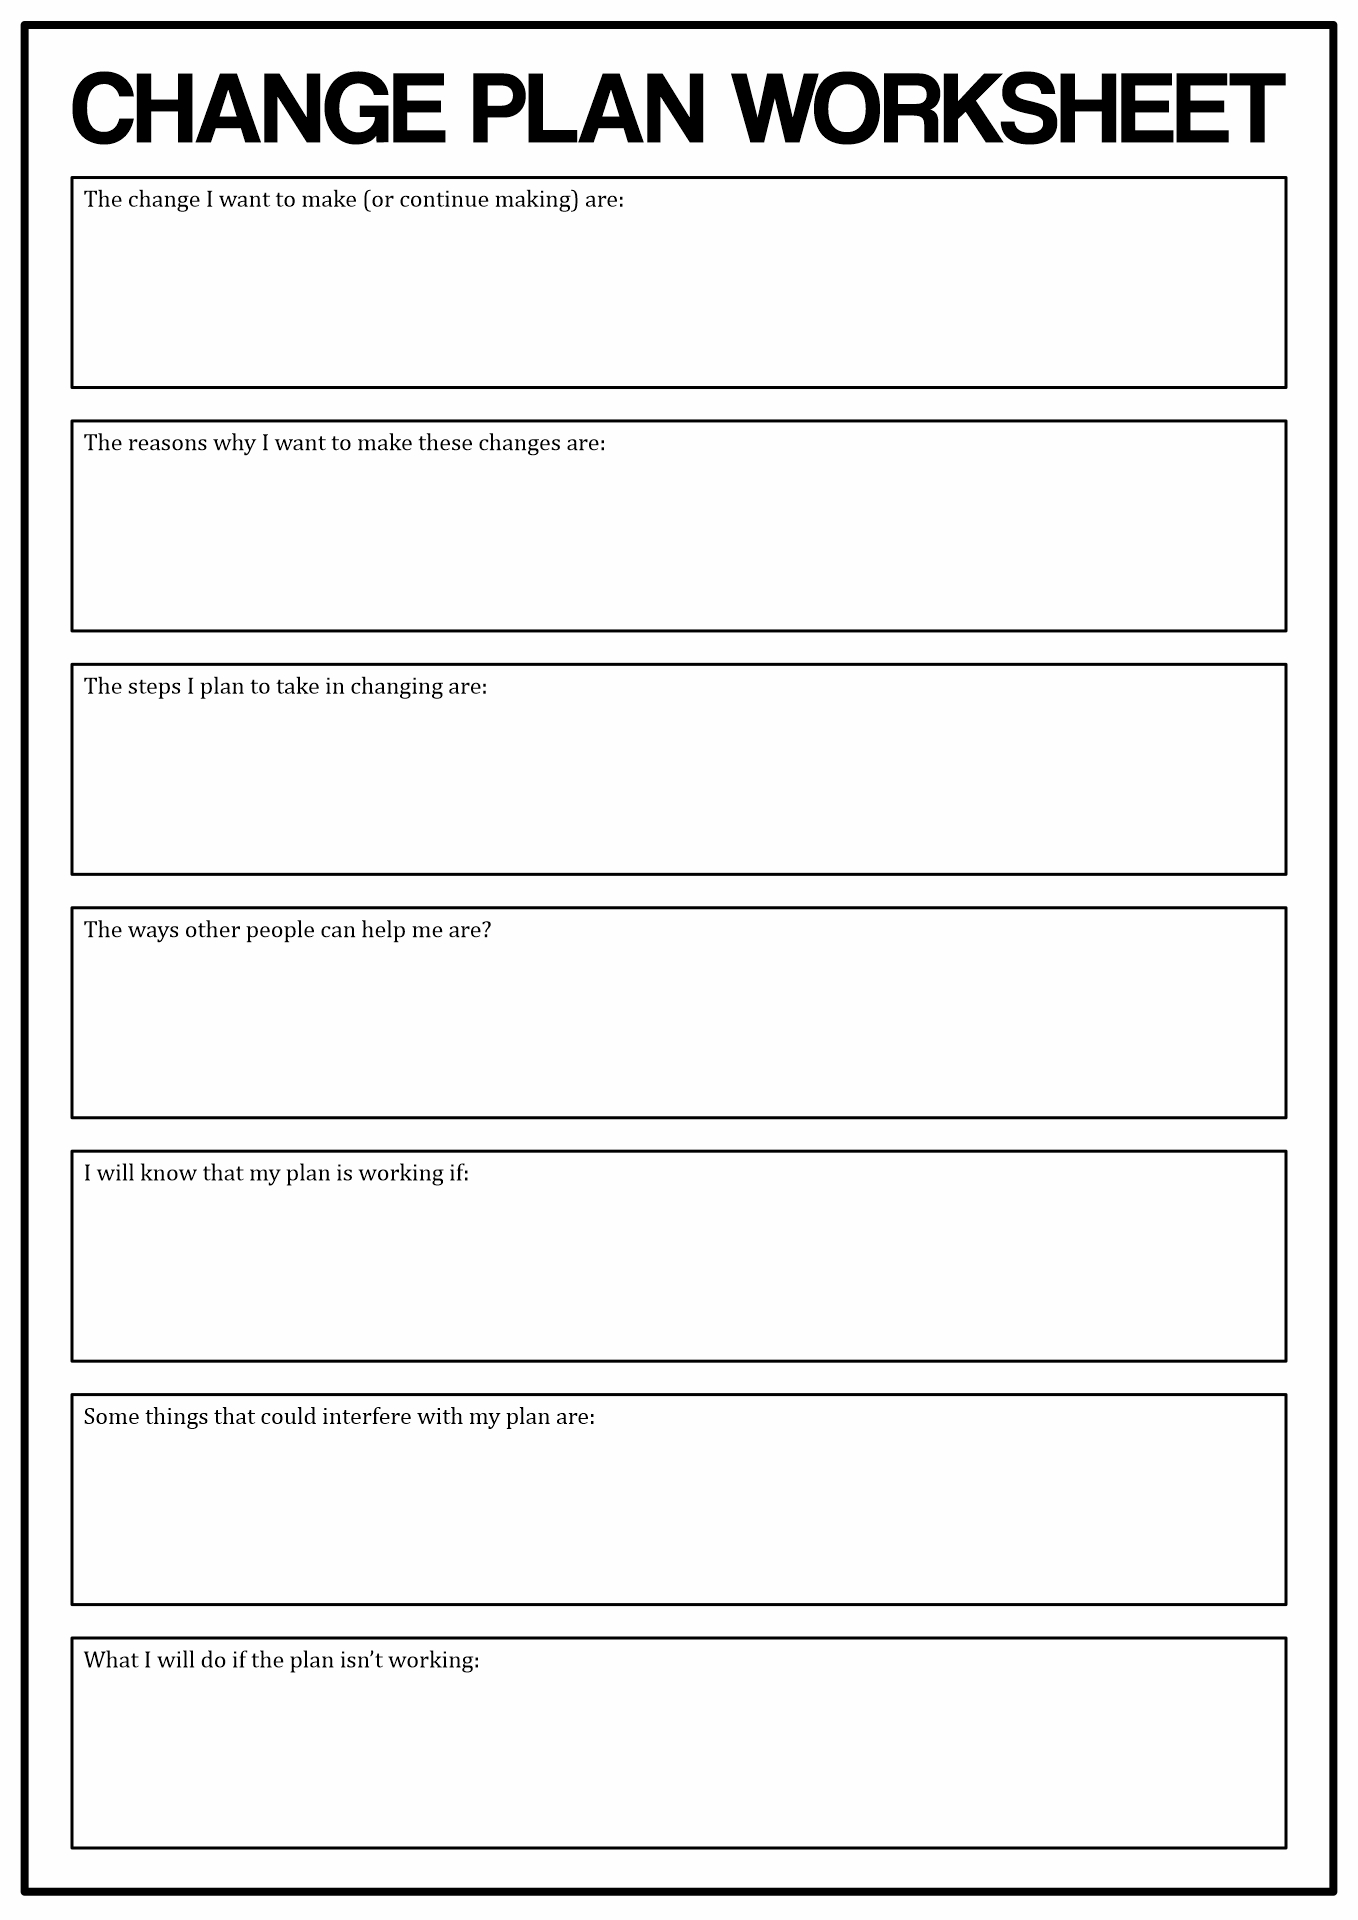 Motivational Interviewing Stages of Change Worksheet Image